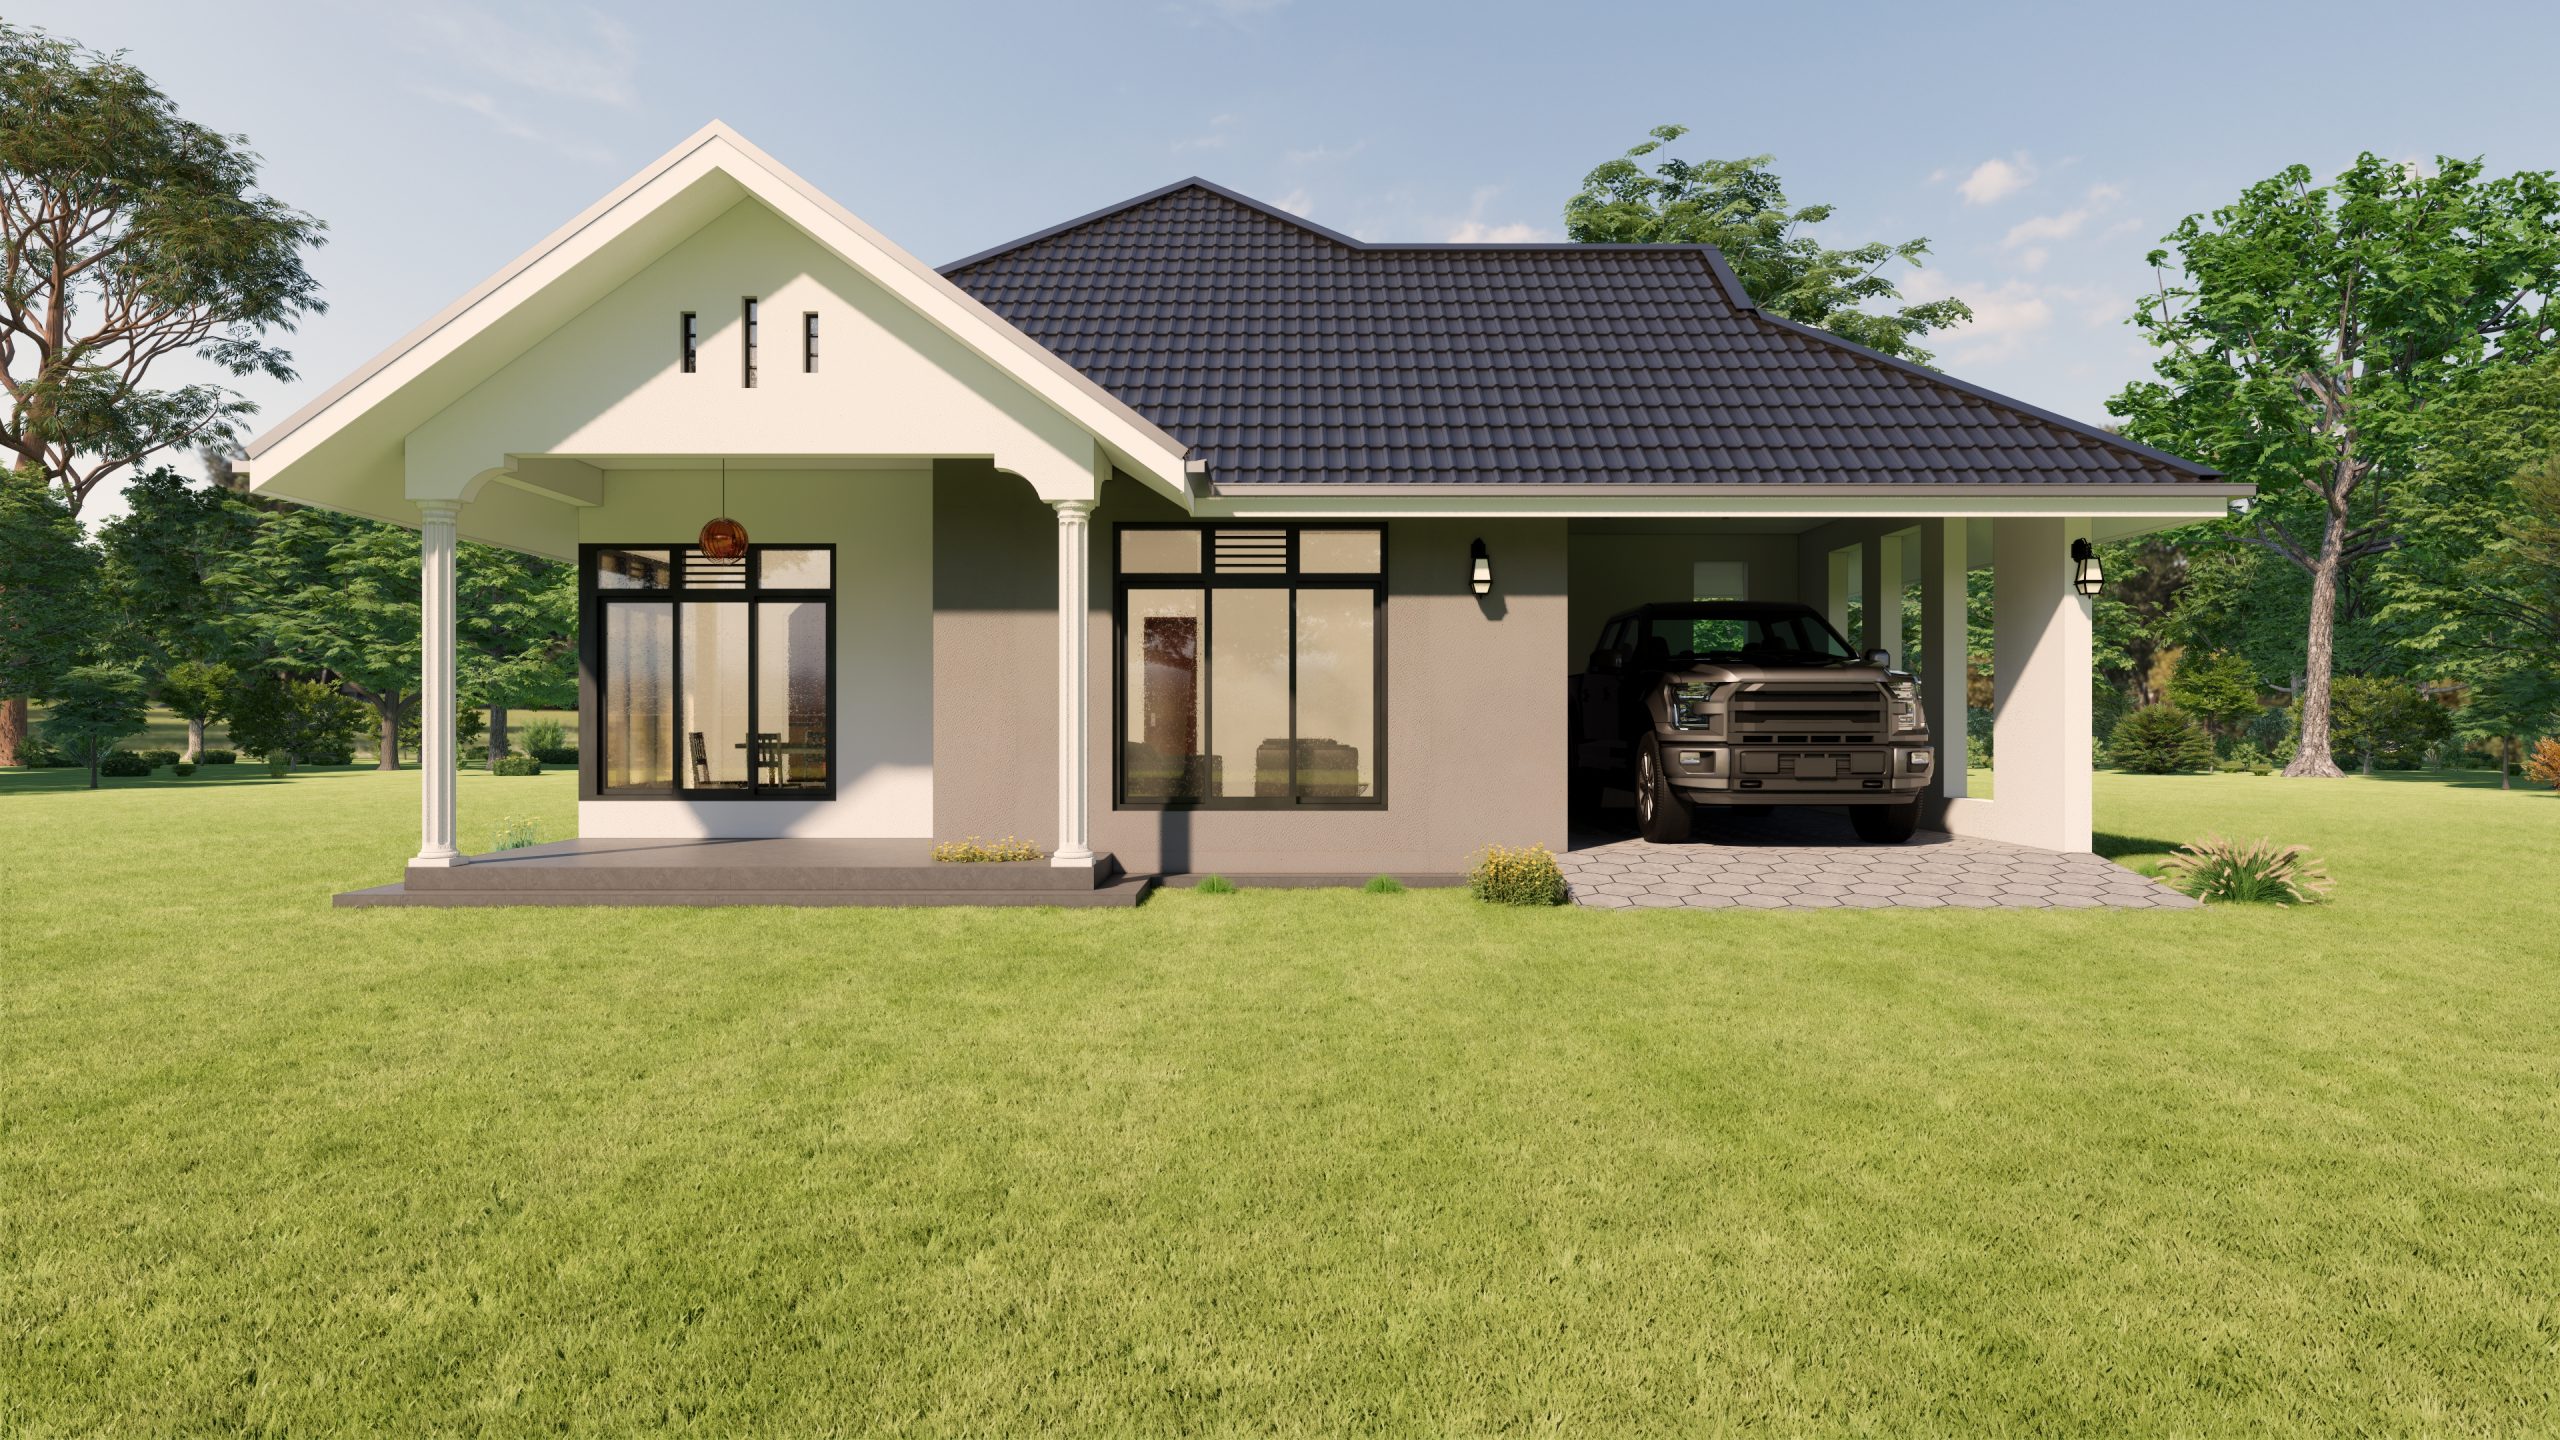 A Nice Three Bedroom Bungalow House Plan